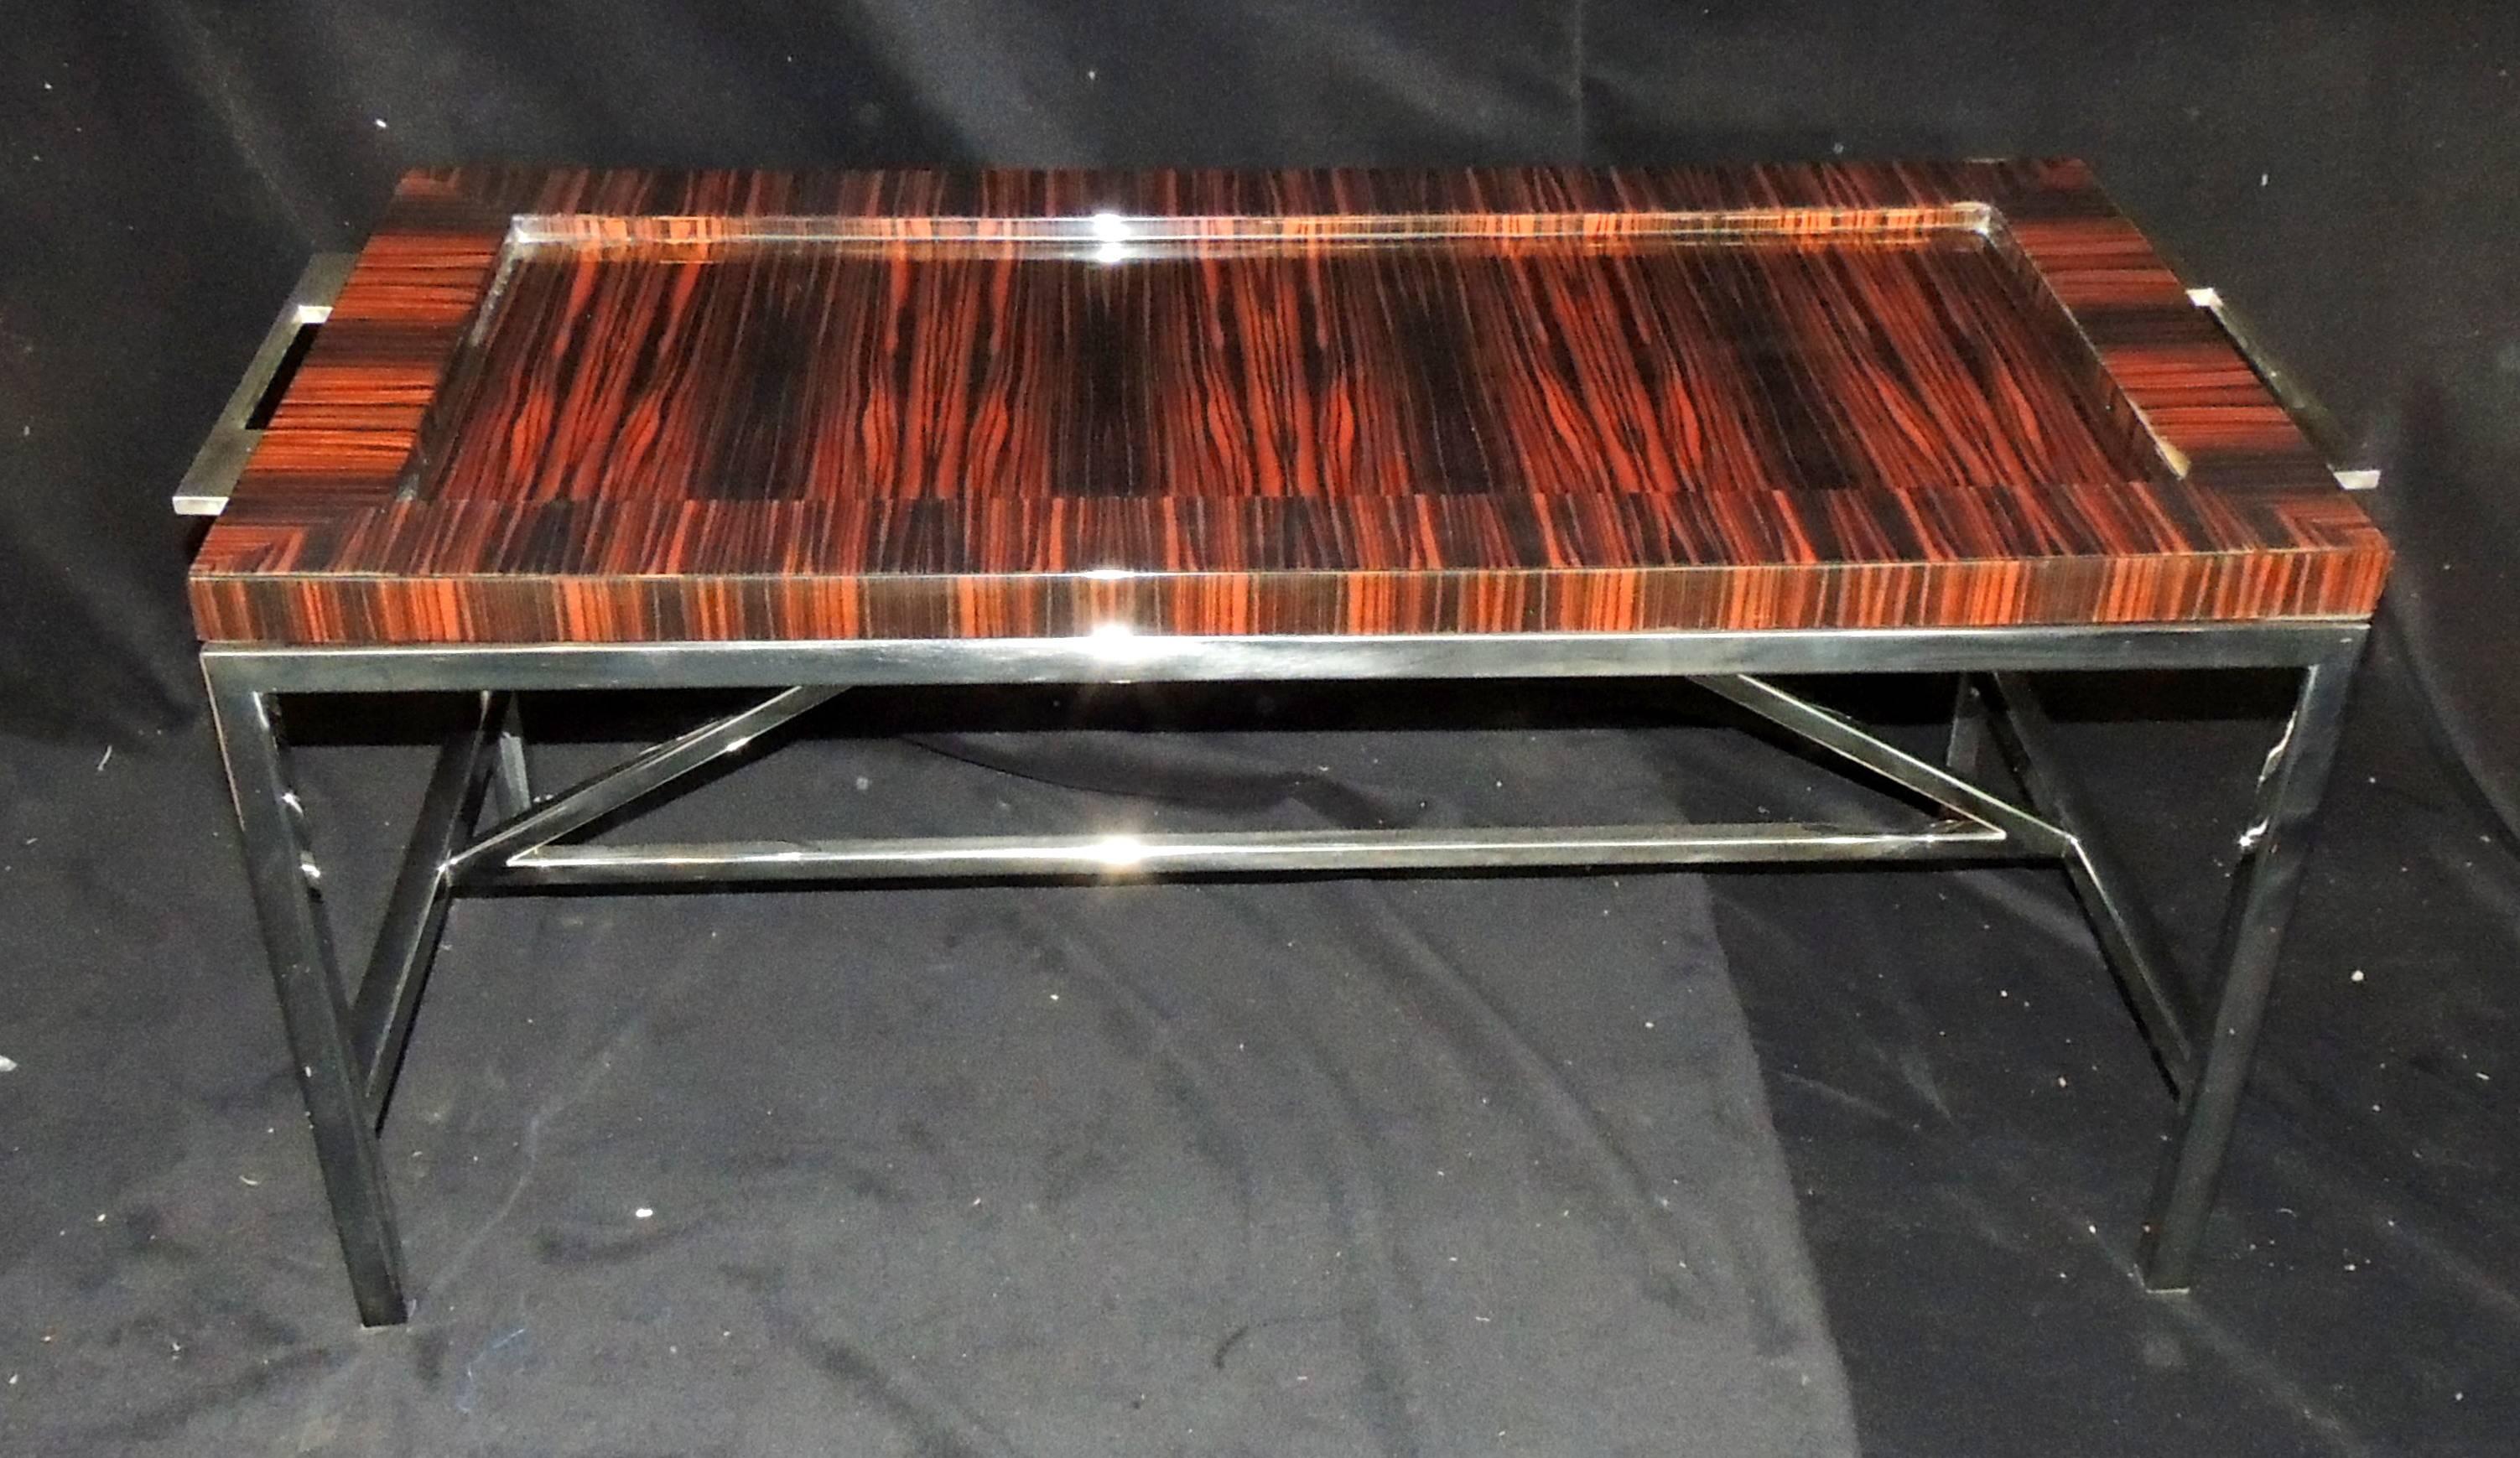 A wonderful midcentury Macassar ebony and polished nickel base and side handle, Art Deco style removable tray top coffee table. Purchased from Lorin Marsh.
Top of table has minor finish blemish.
Measure: 42 1/2